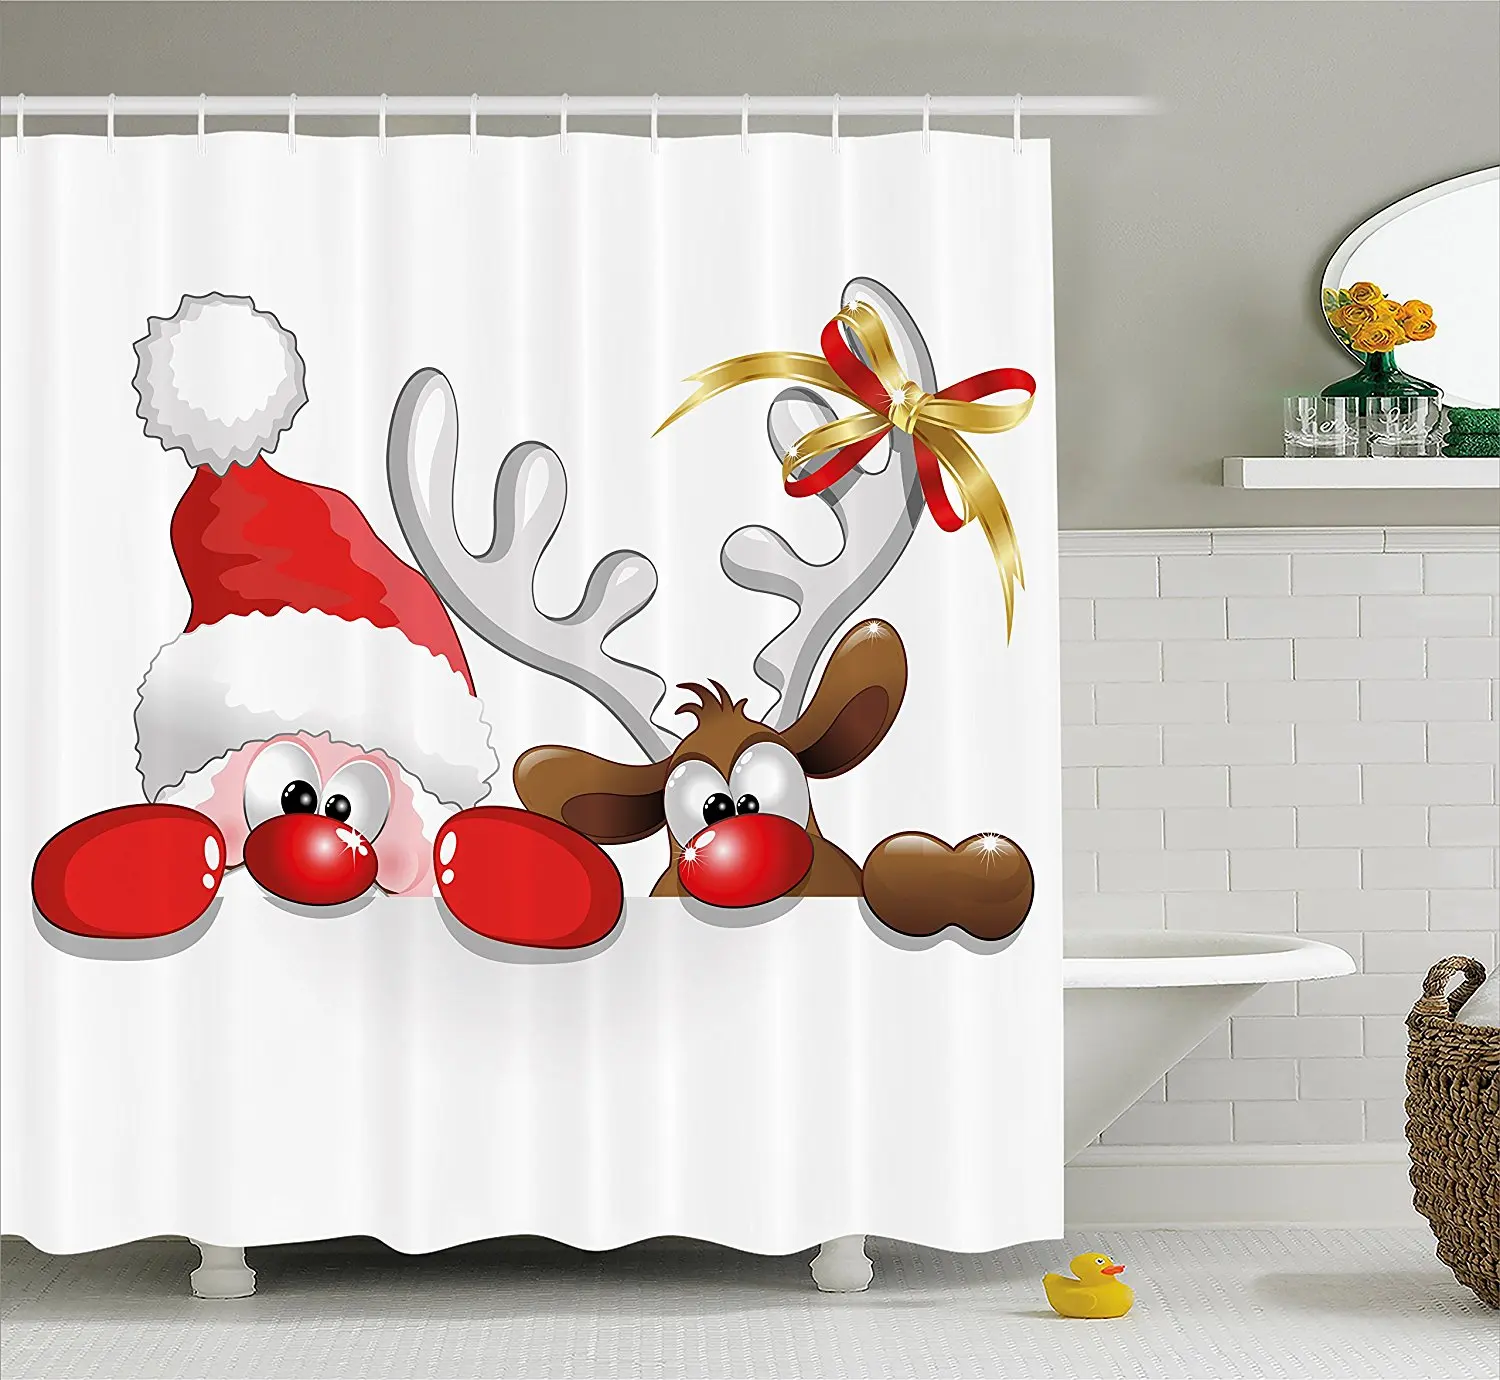 39.99. Christmas Shower Curtain by Ambesonne, Funny Christmas Santa Claus a...